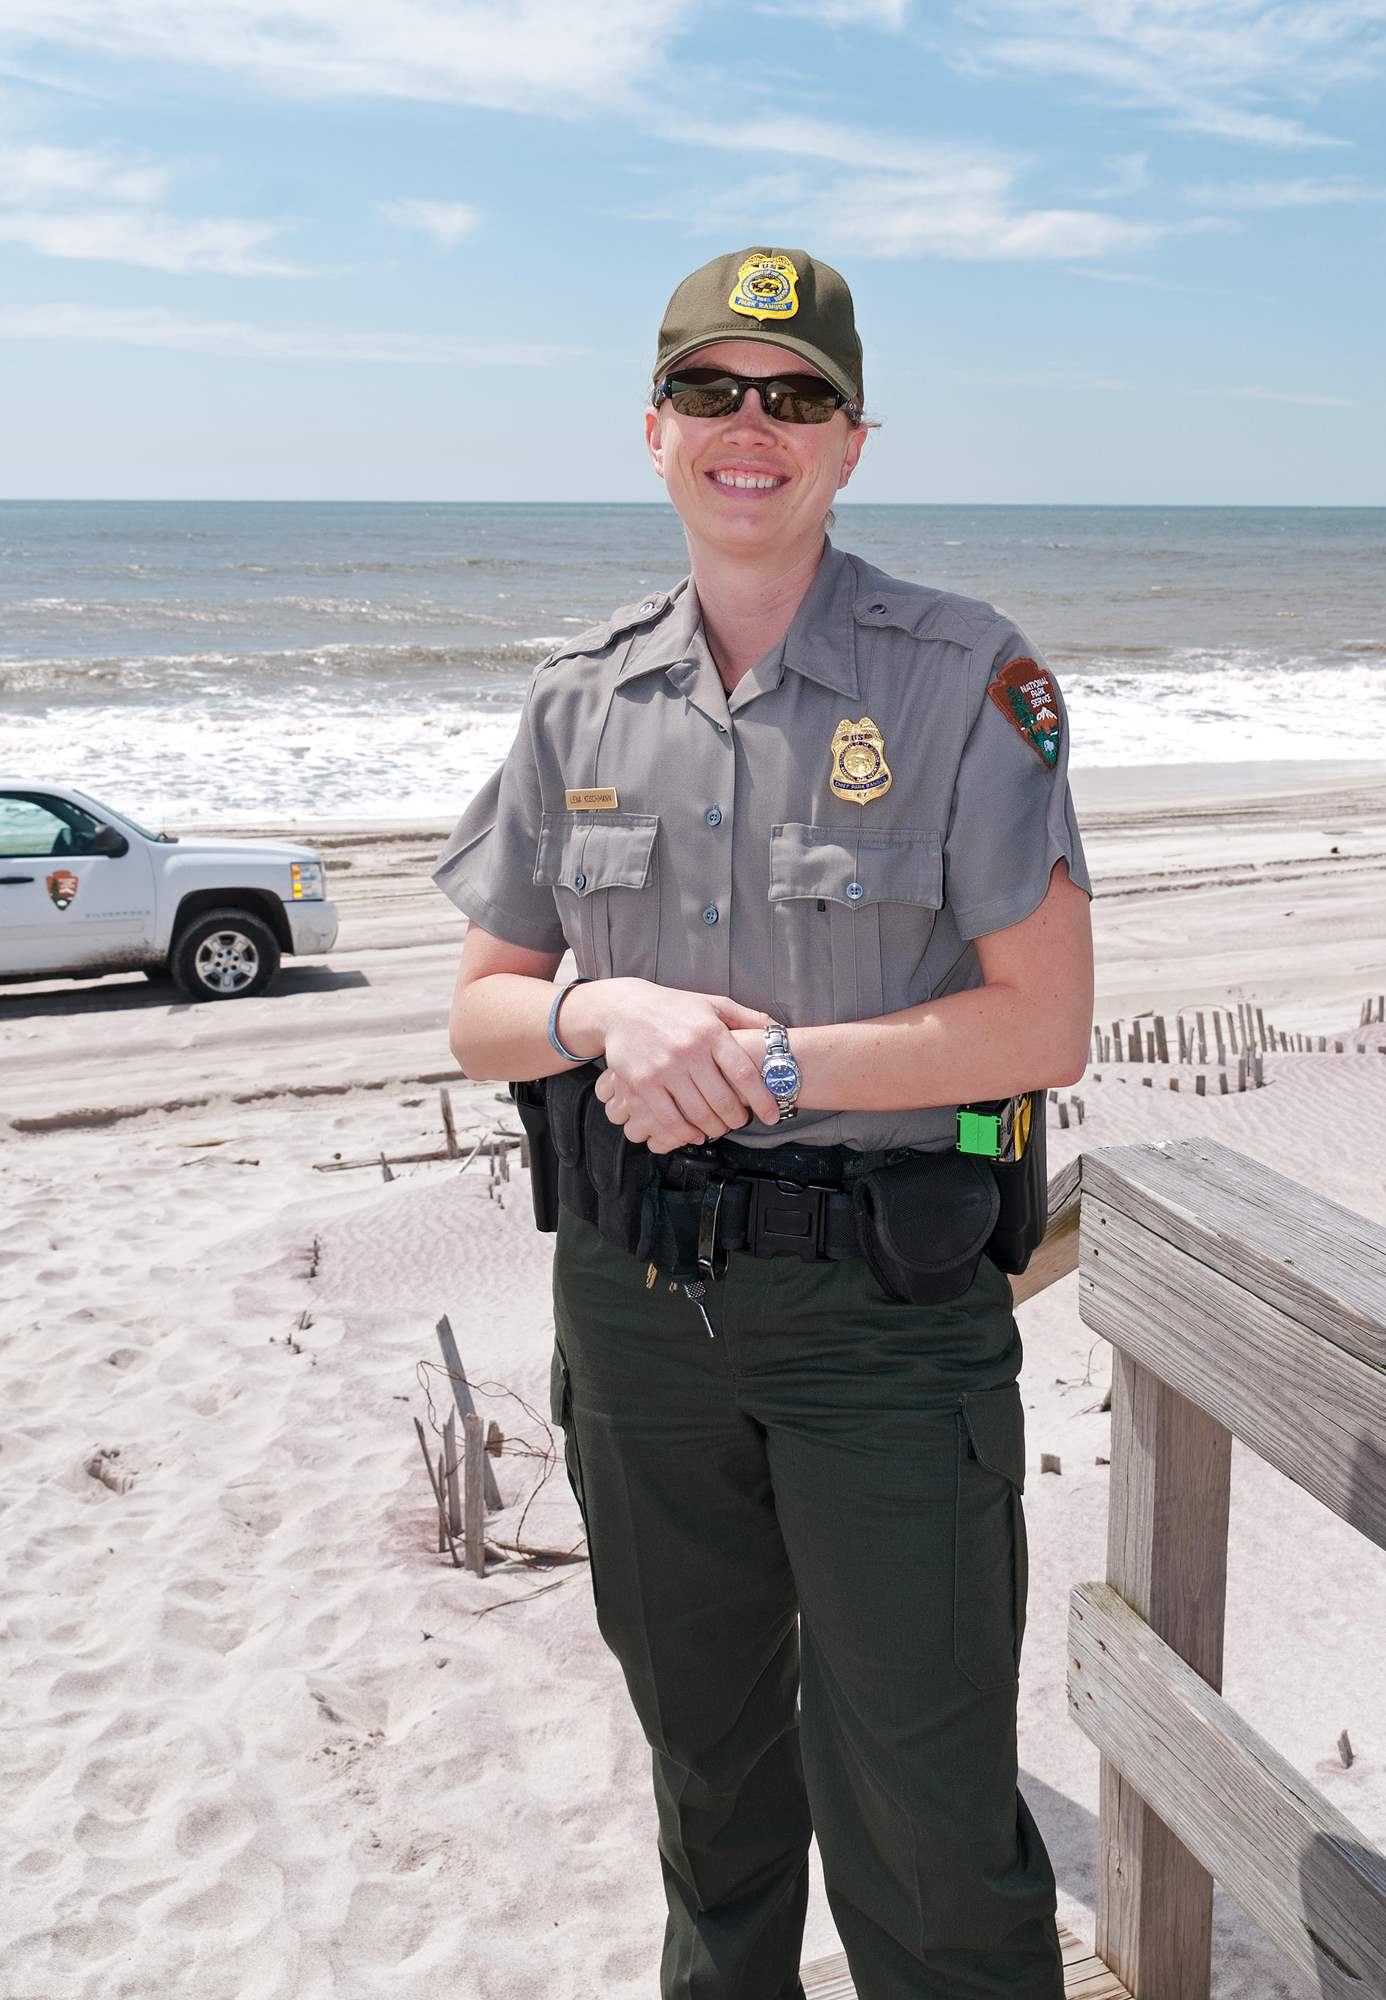 Lena Koschmann stands on a beach wearing NPS uniform and ball cap. She has a shield-shaped badge with an eagle perched on top pinned to her shirt.